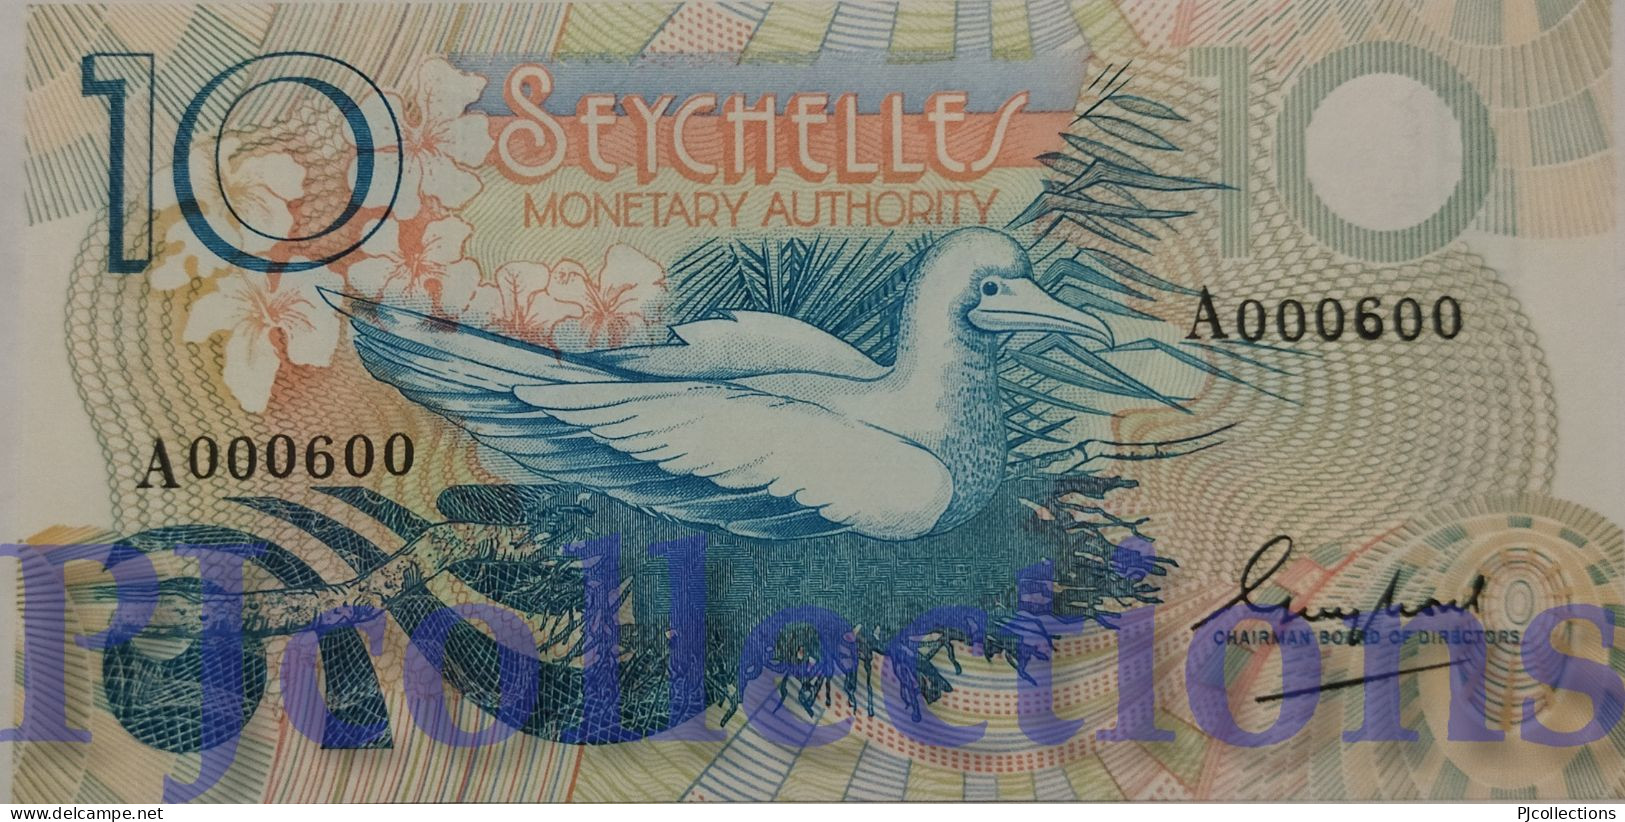 SEYCHELLES 10 RUPEES 1979 PICK 23a LOW & GOOD SERIAL NUMBER "A000600" - Seychelles